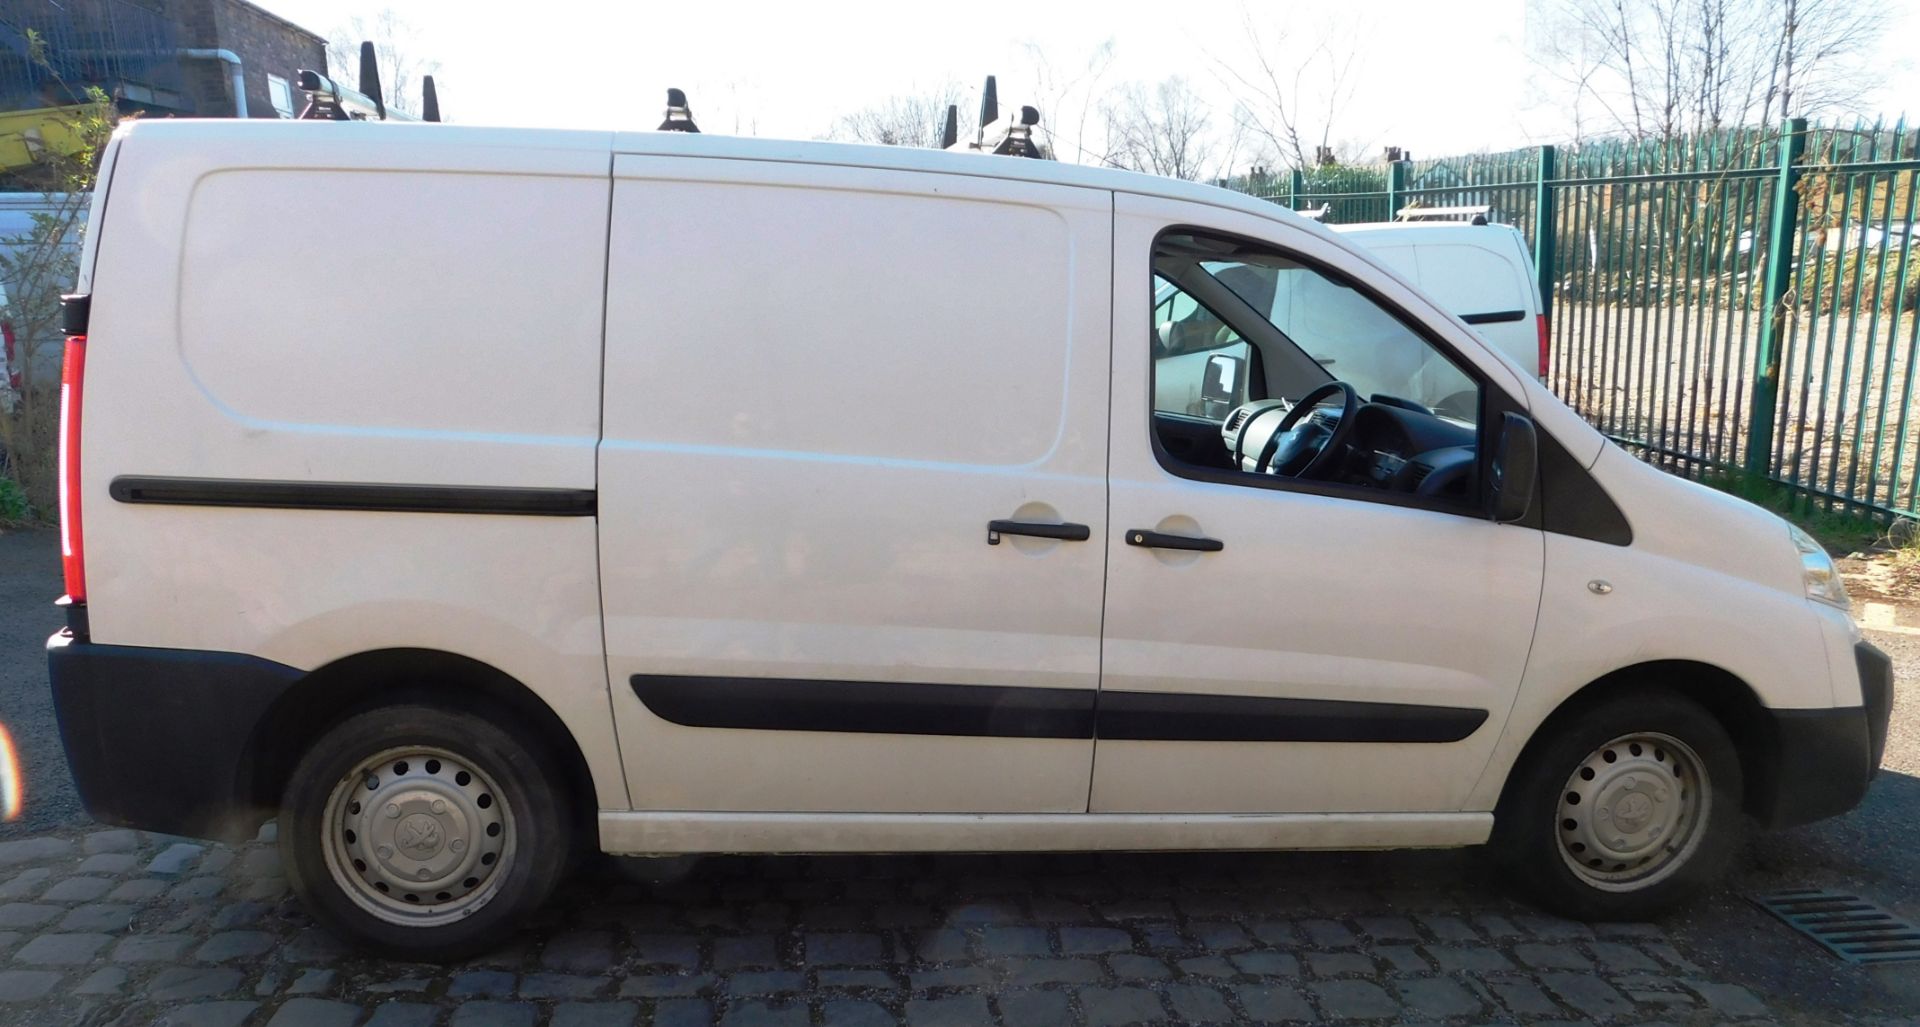 Peugeot Expert L1 1000 1.6 HDi 90 H1 panel van, registration OV15 WXY, first registered 31 May 2015, - Image 6 of 14